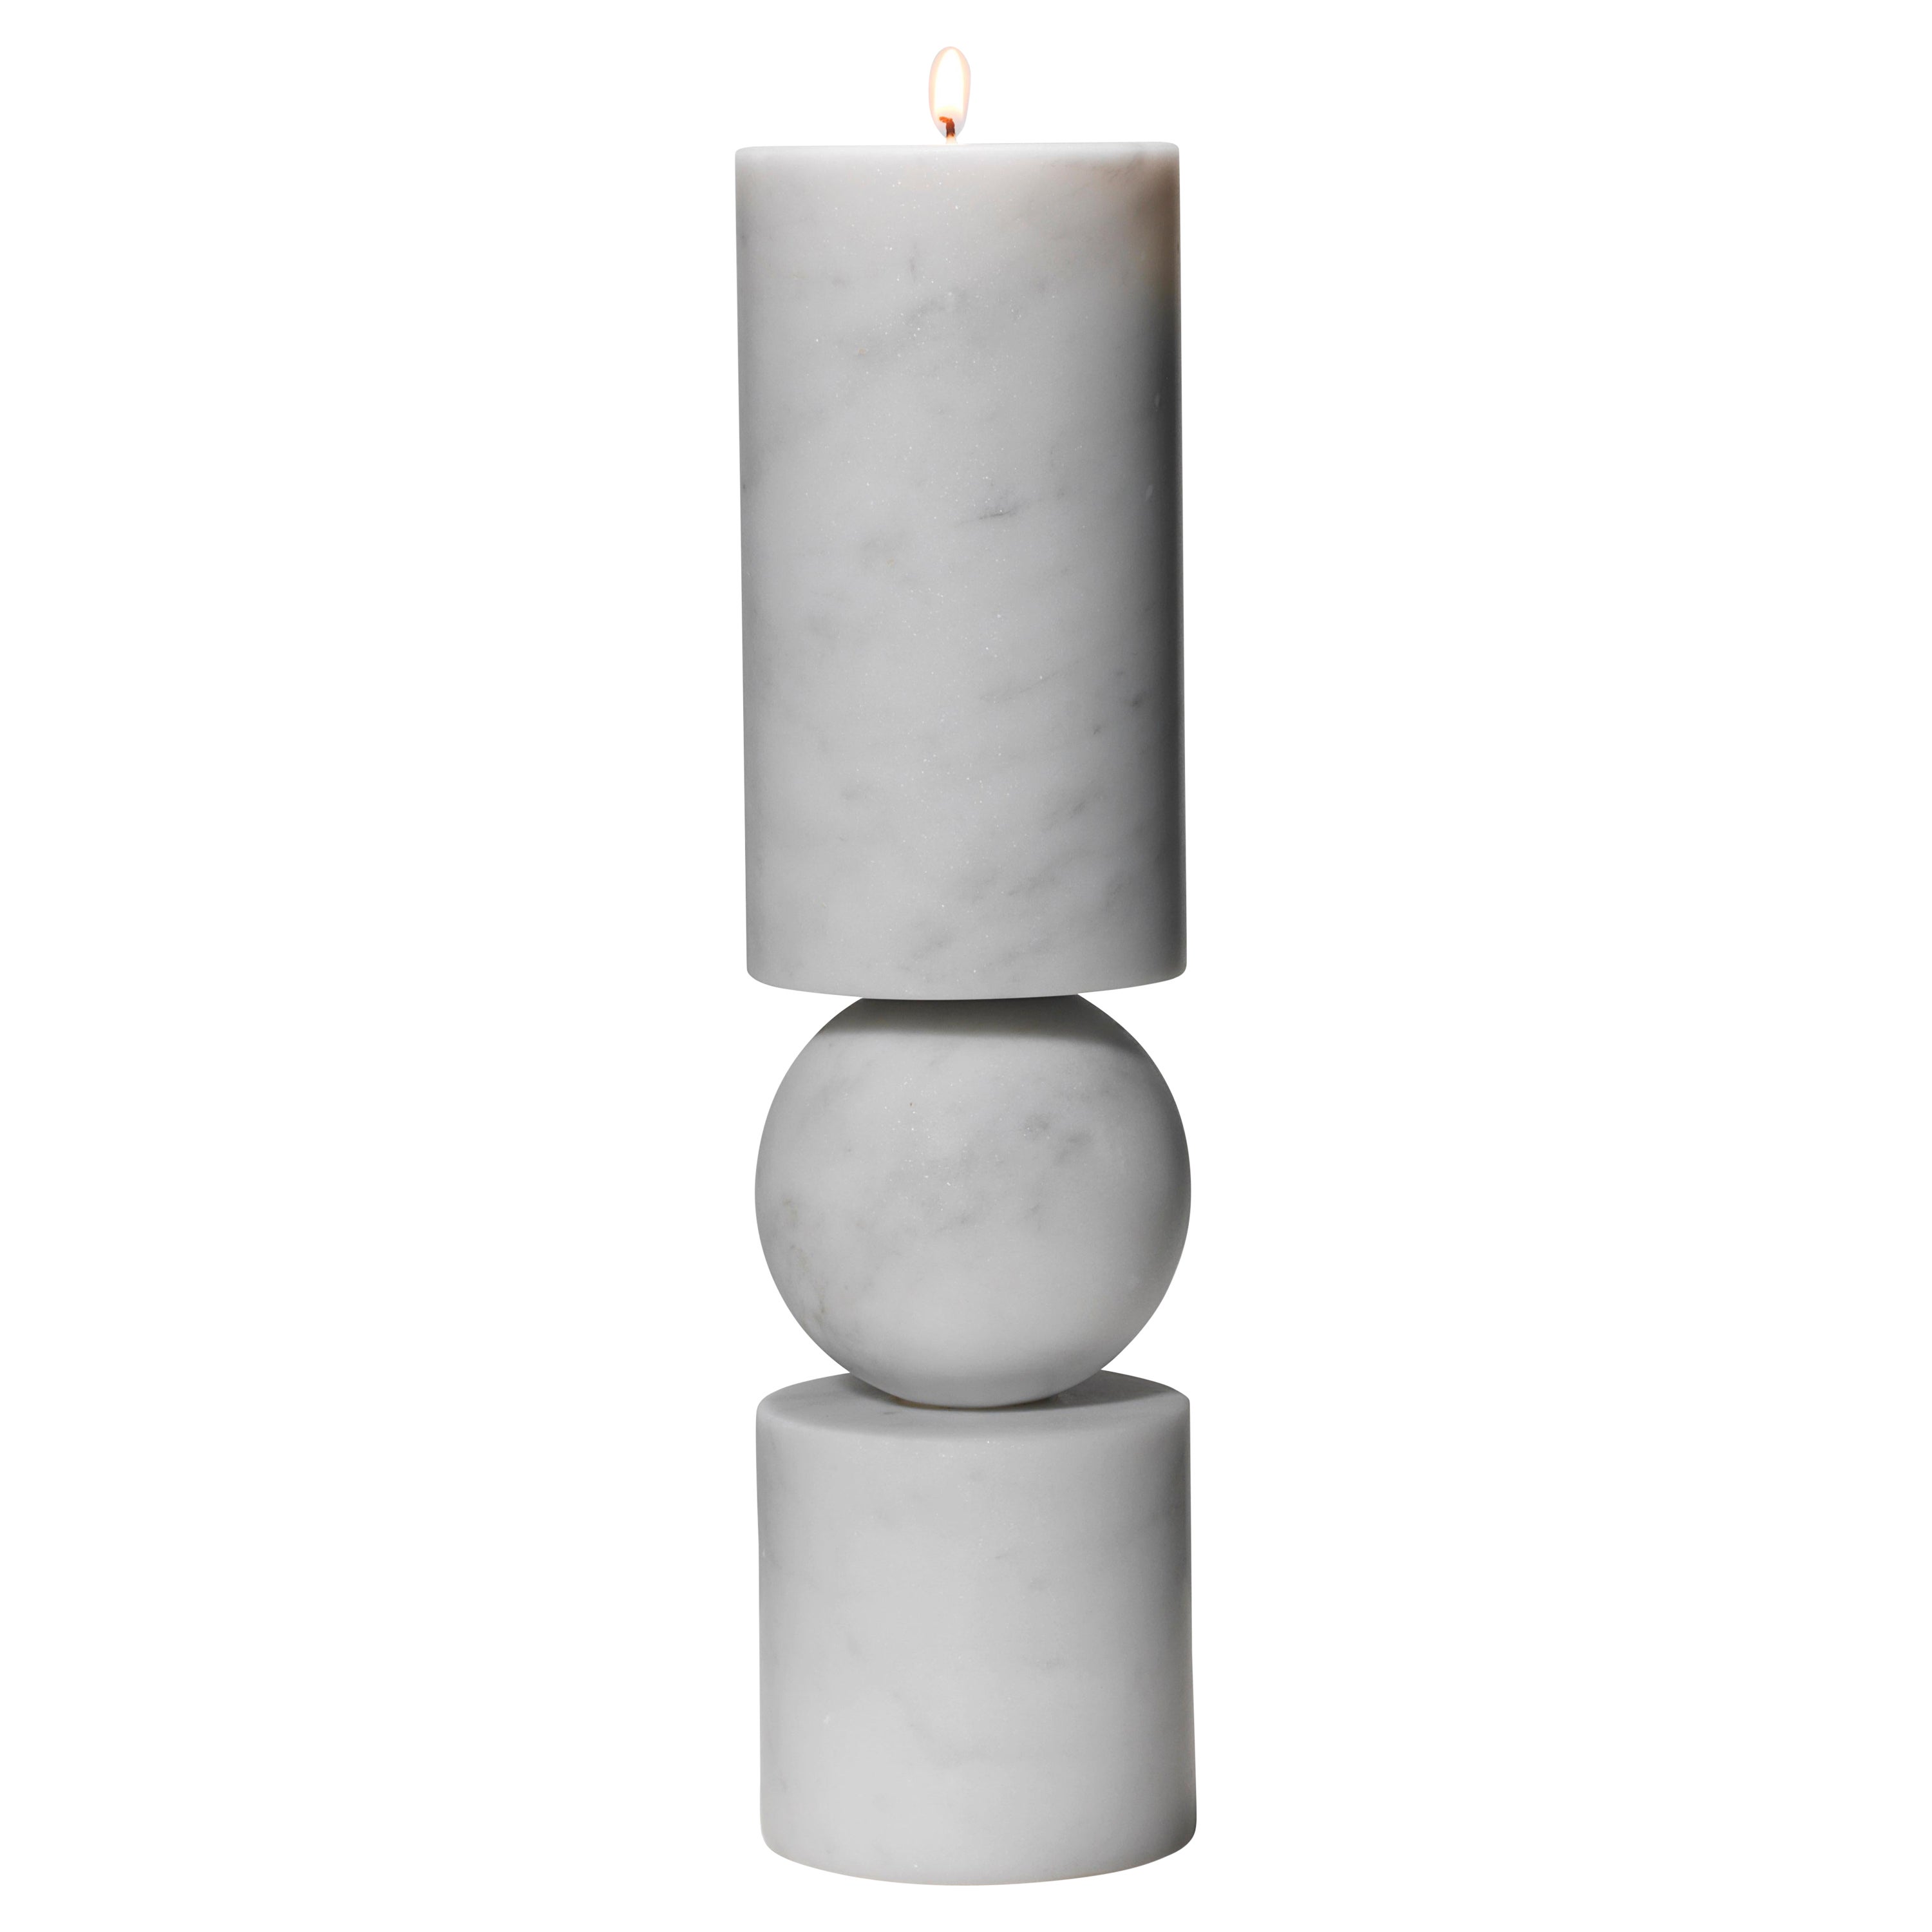 Lee Broom - Fulcrum Candlestick White Marble - Small For Sale